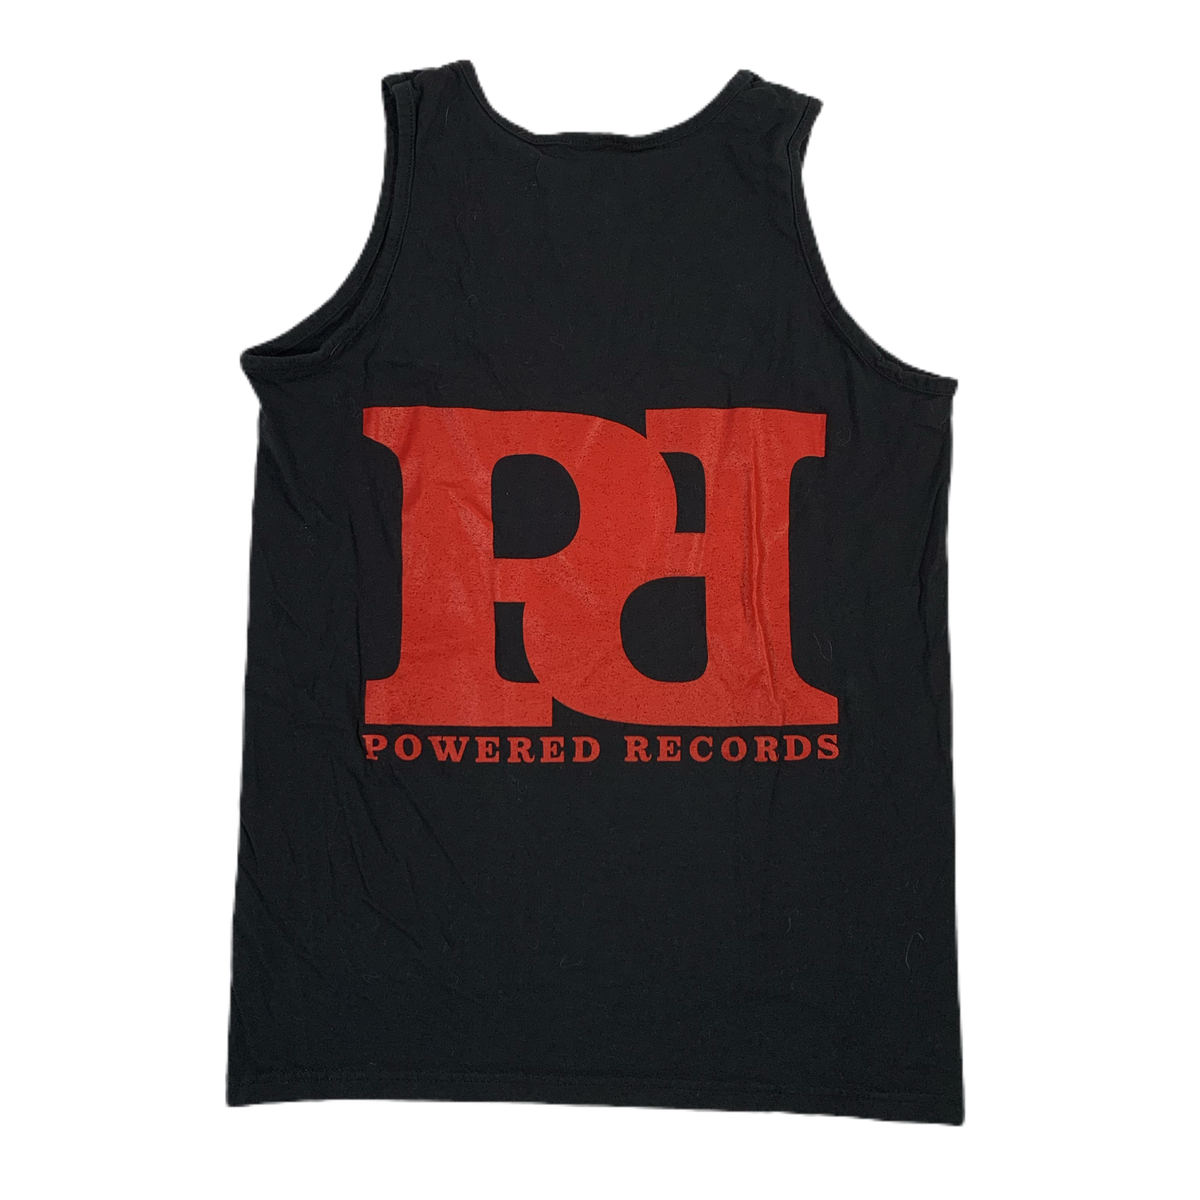 Vintage Loud And Clear “Powered Records” Tank Top - jointcustodydc